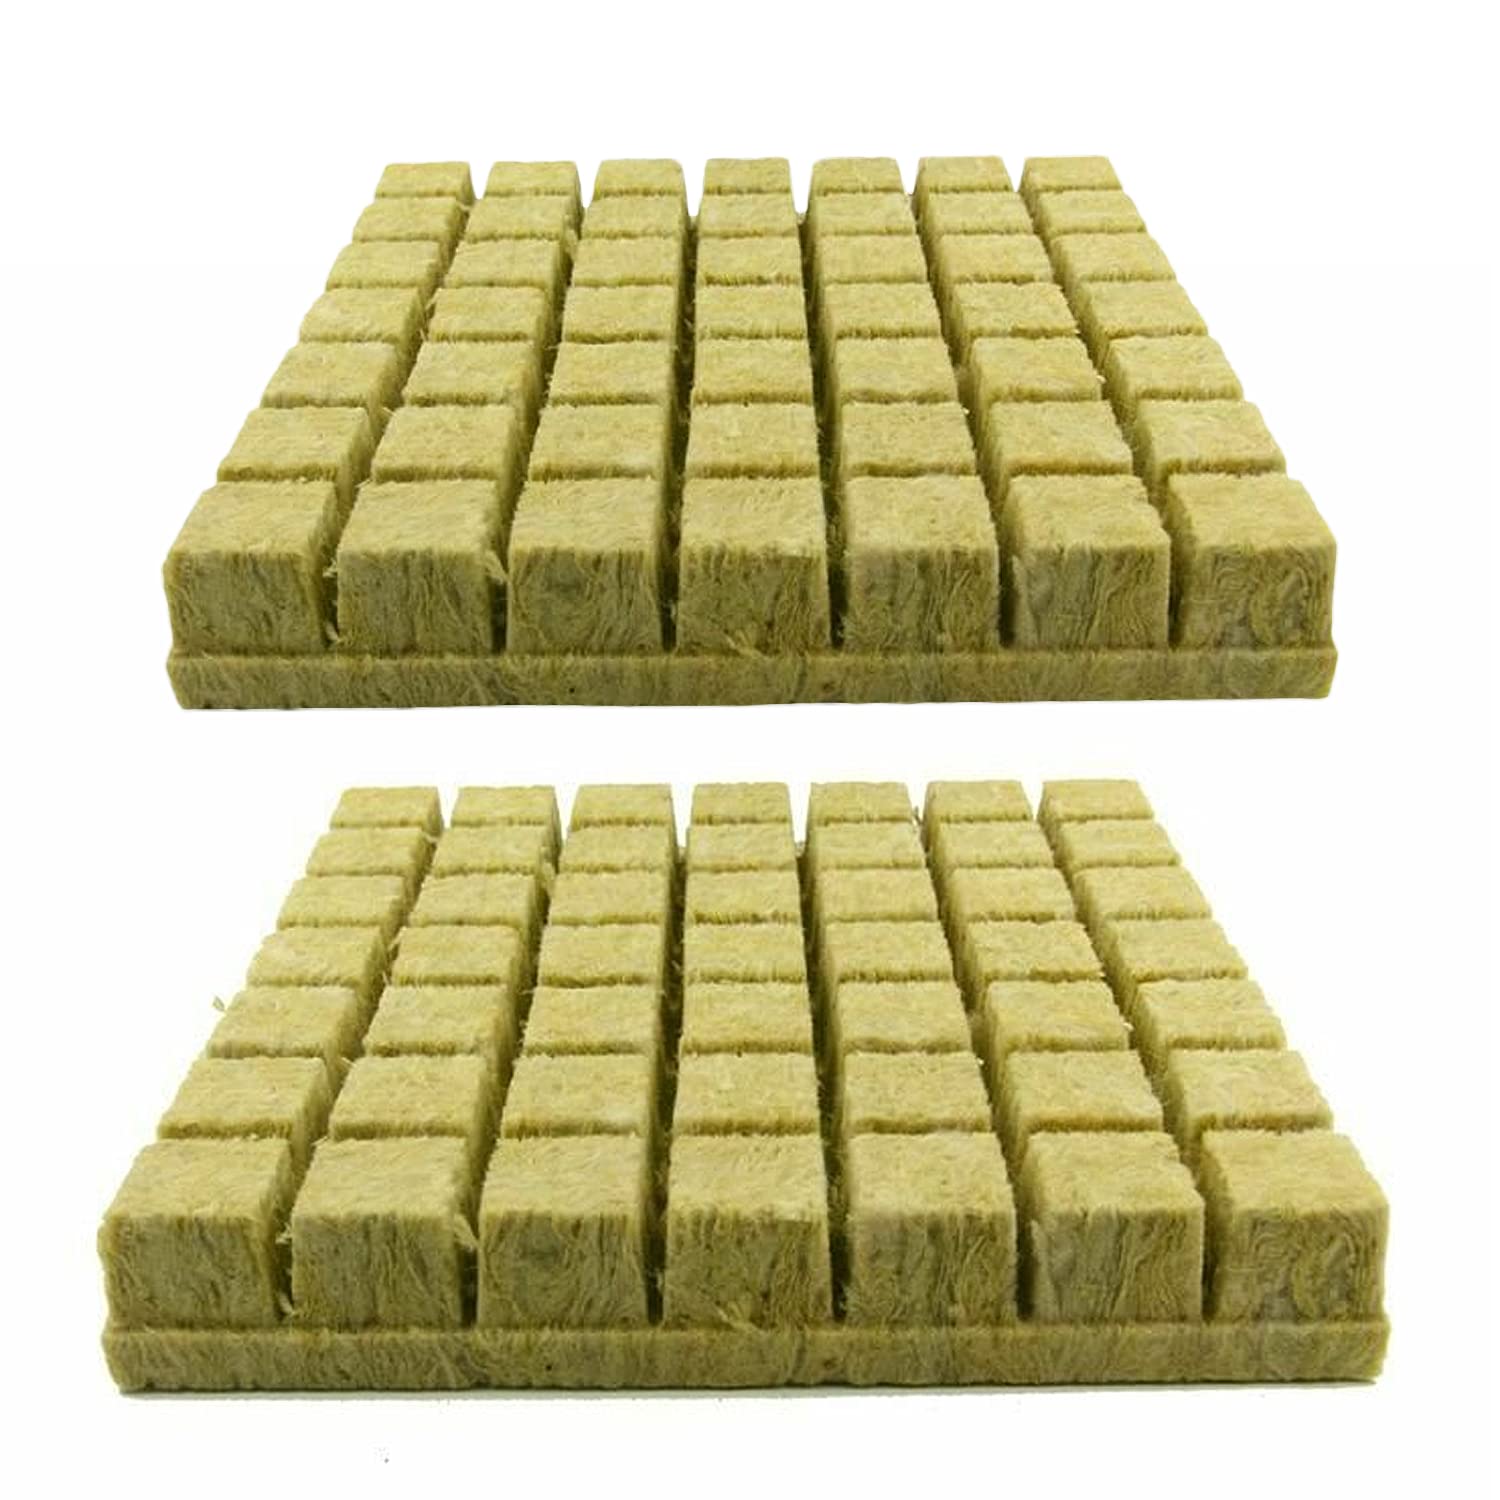 What Is Rockwool For Hydroponics